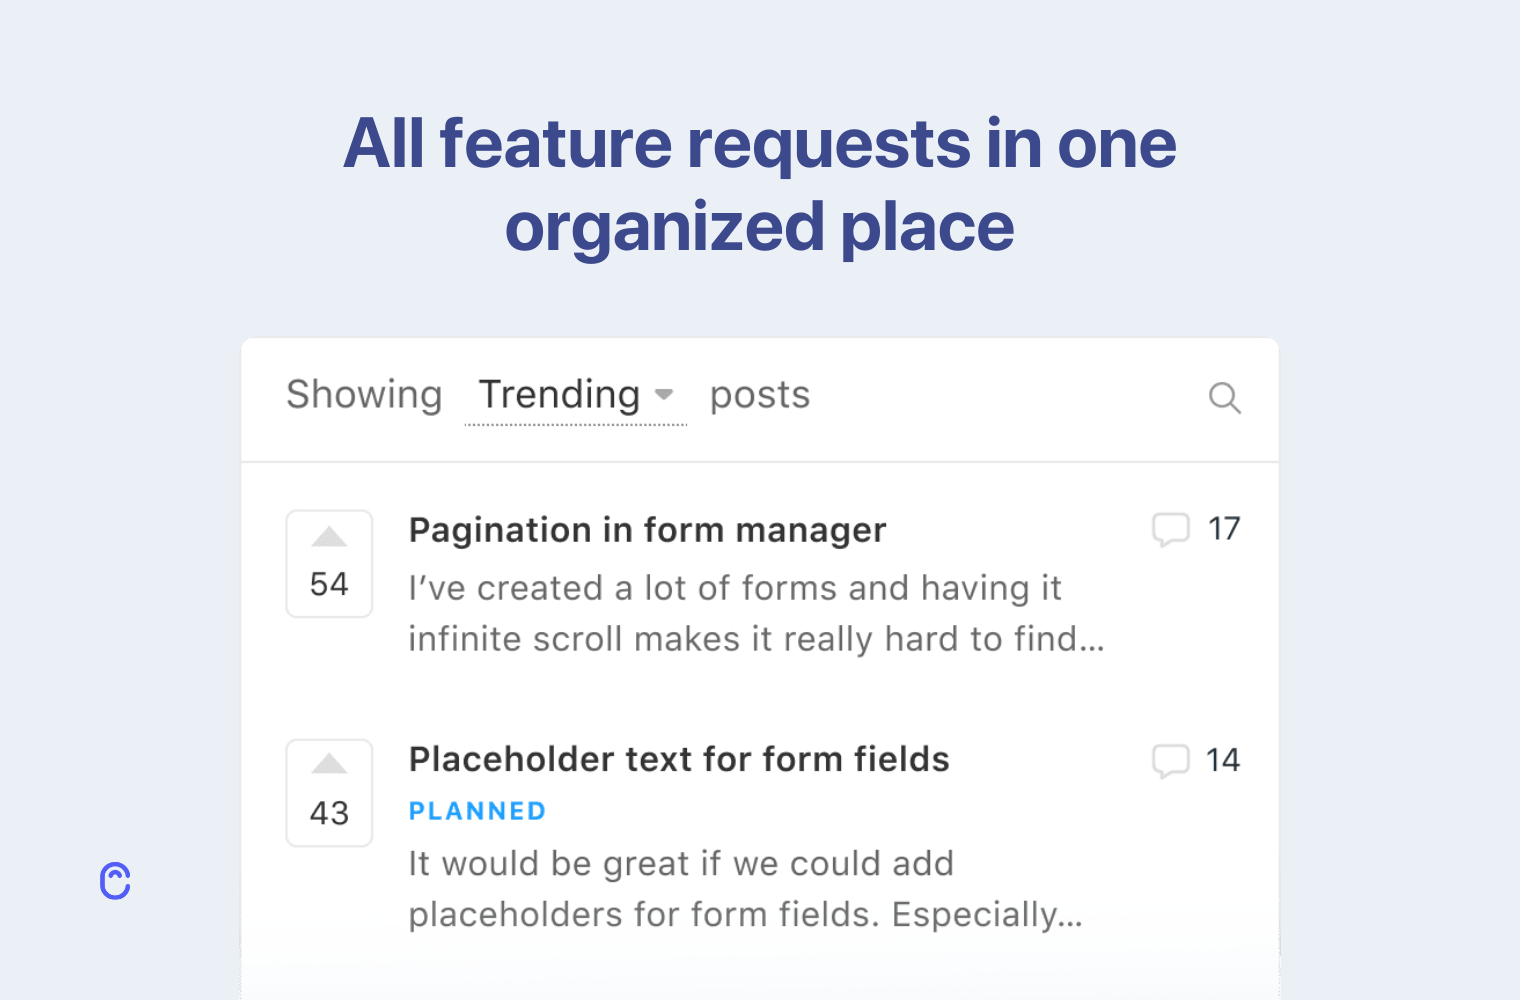 Capture, organize, and analyze all user feedback and feature requests in one place.